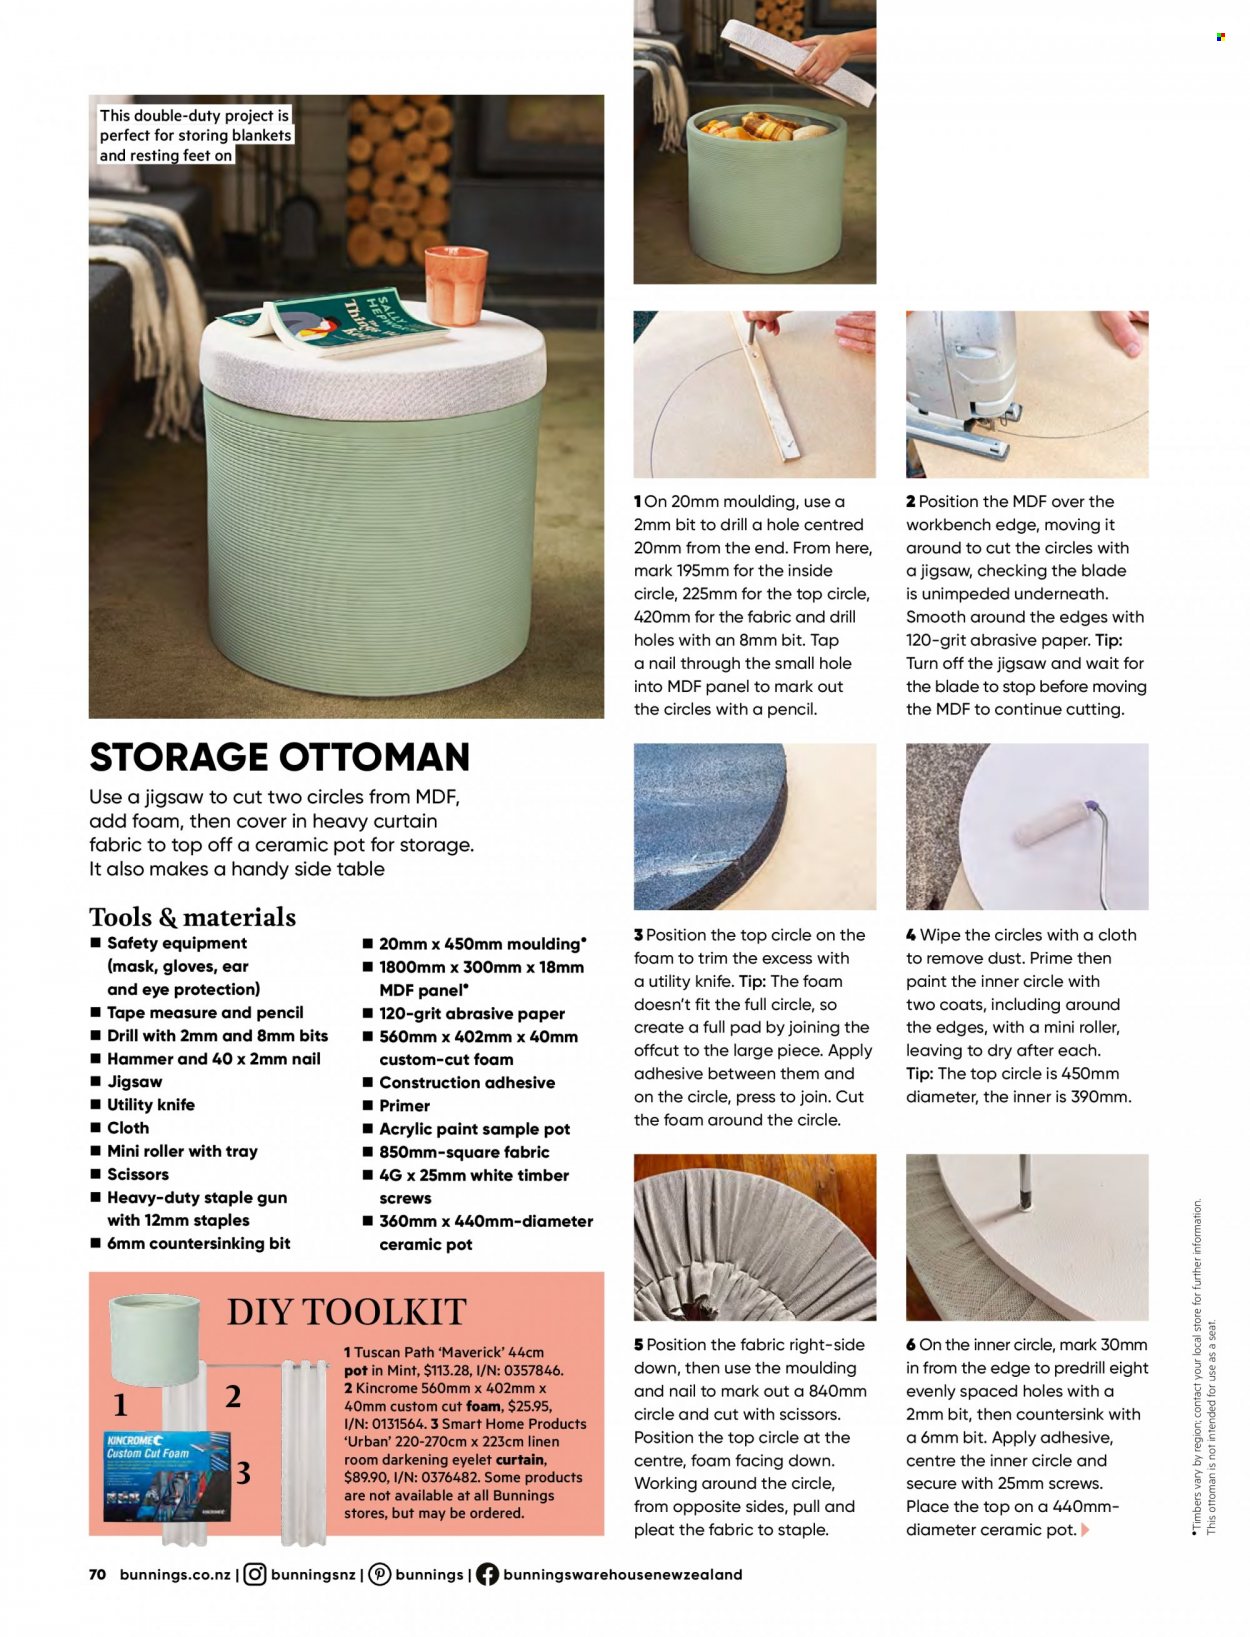 thumbnail - Bunnings Warehouse mailer - Sales products - table, work bench, sidetable, ottoman, gloves, pot, blanket, linens, adhesive, roller, paint, jig saw, scissors, measuring tape, utility knife. Page 70.